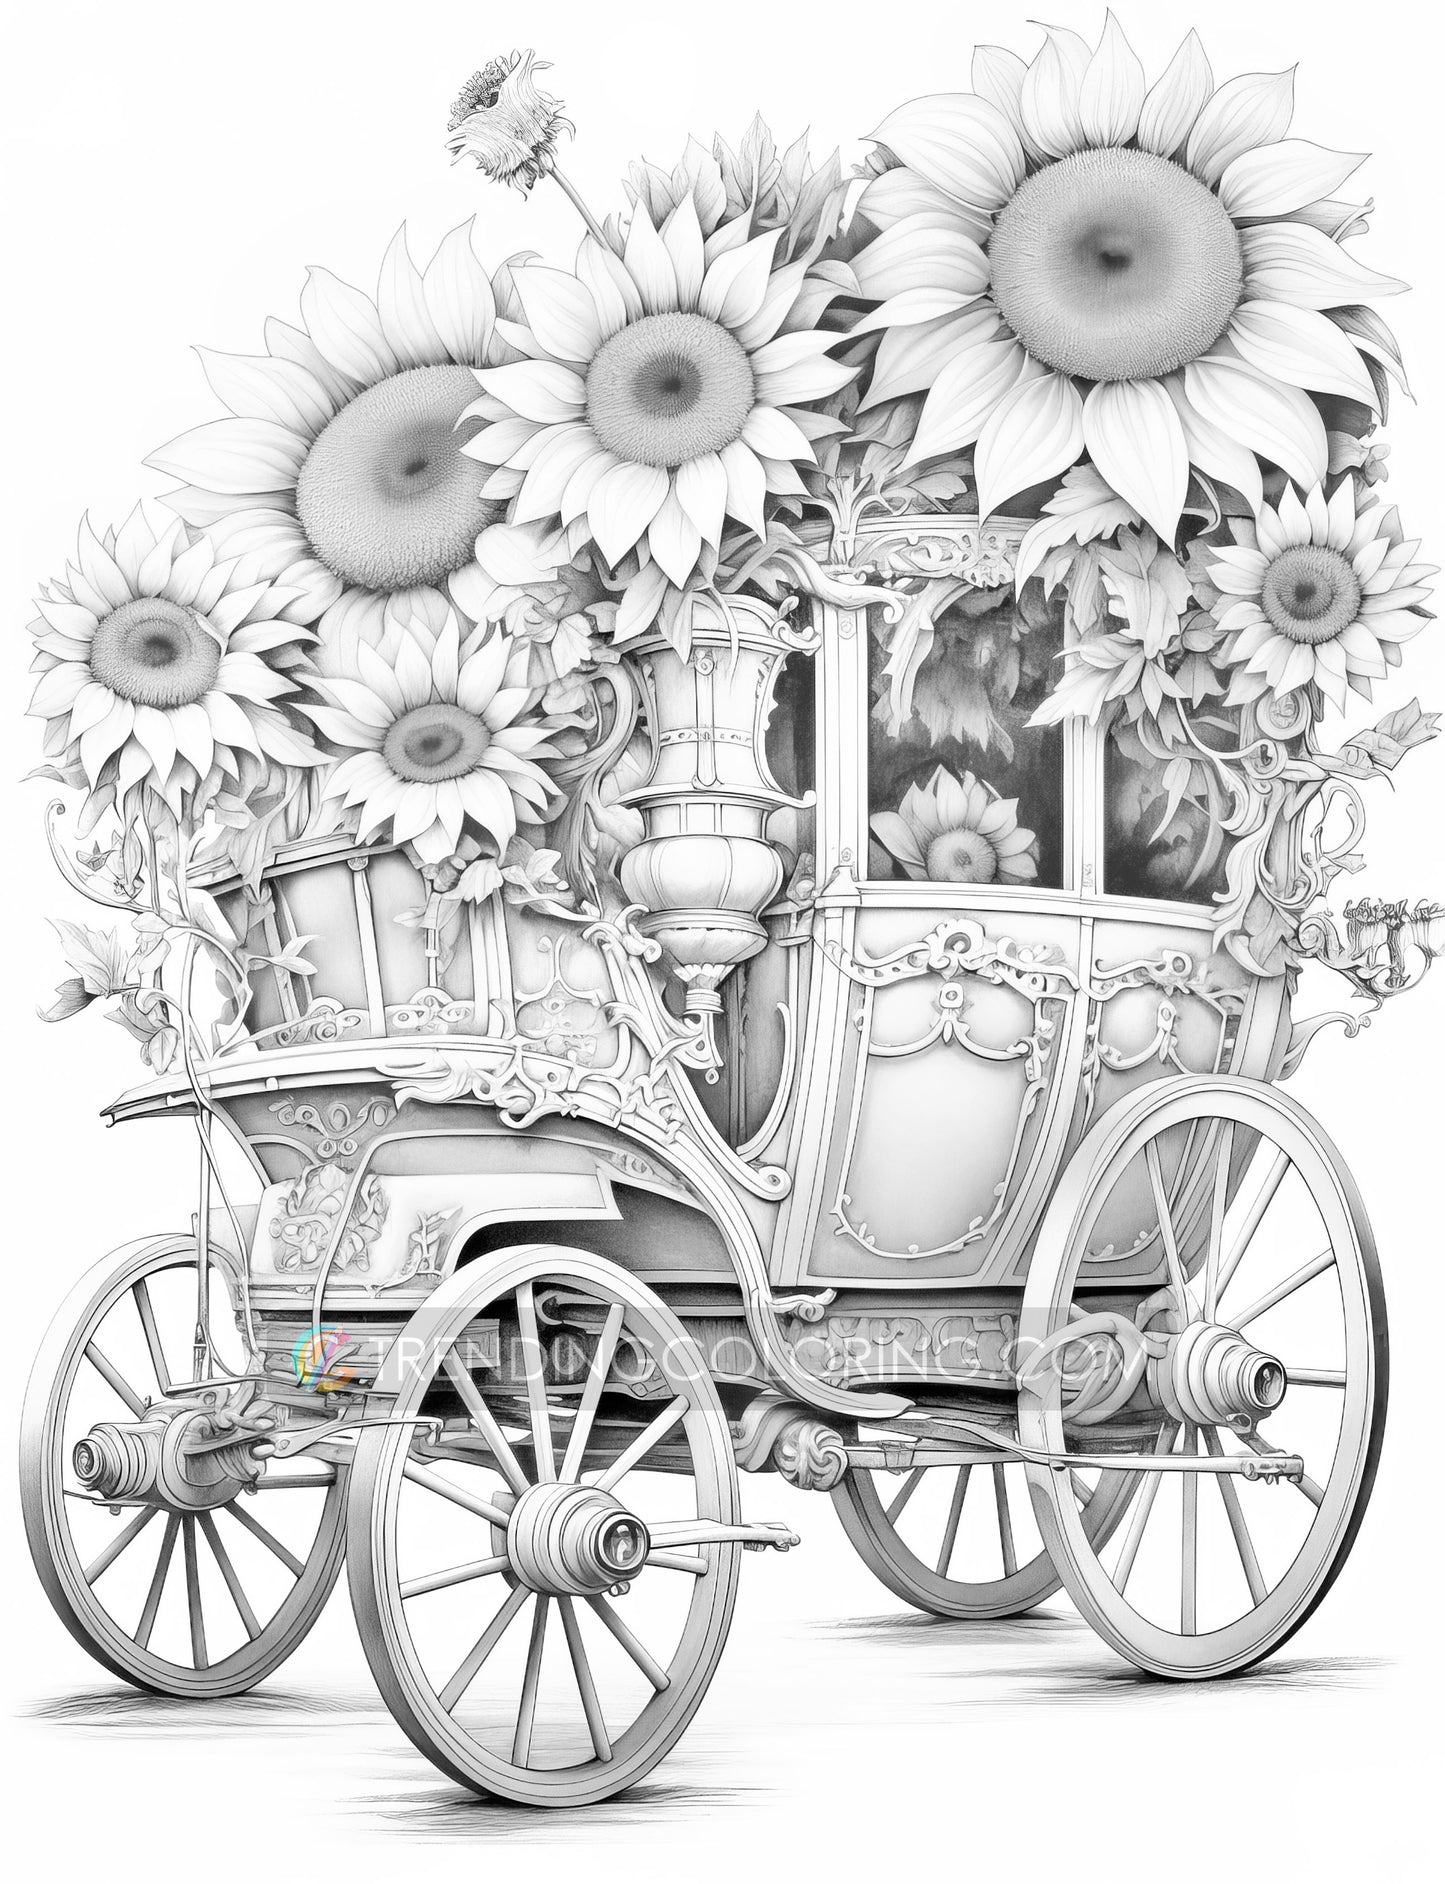 25 Floral Carriage Grayscale Coloring Pages - Instant Download, Dark/Light Illustration